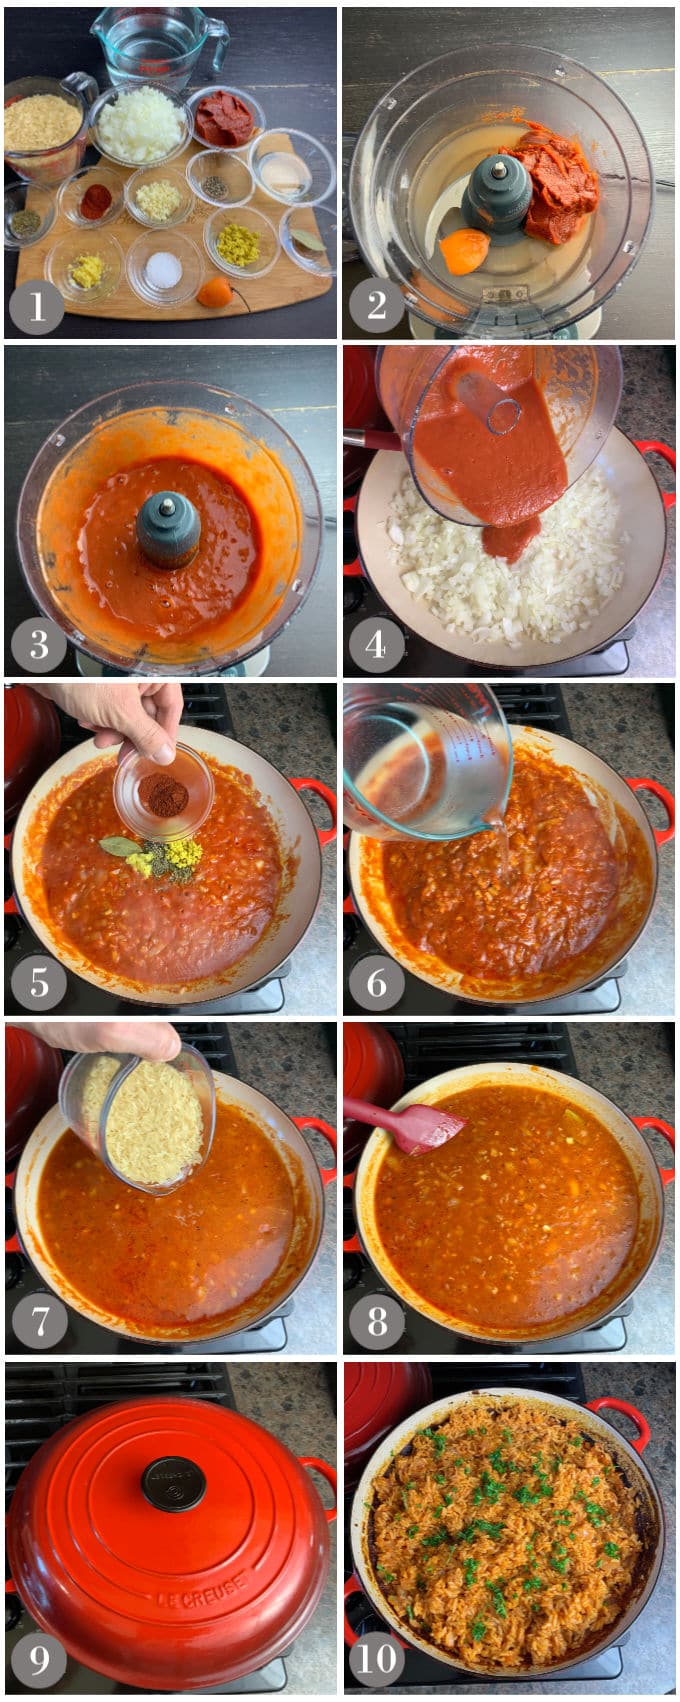 A collage of photos showing the ingredients and step to make West African jollof rice in a Dutch oven. 